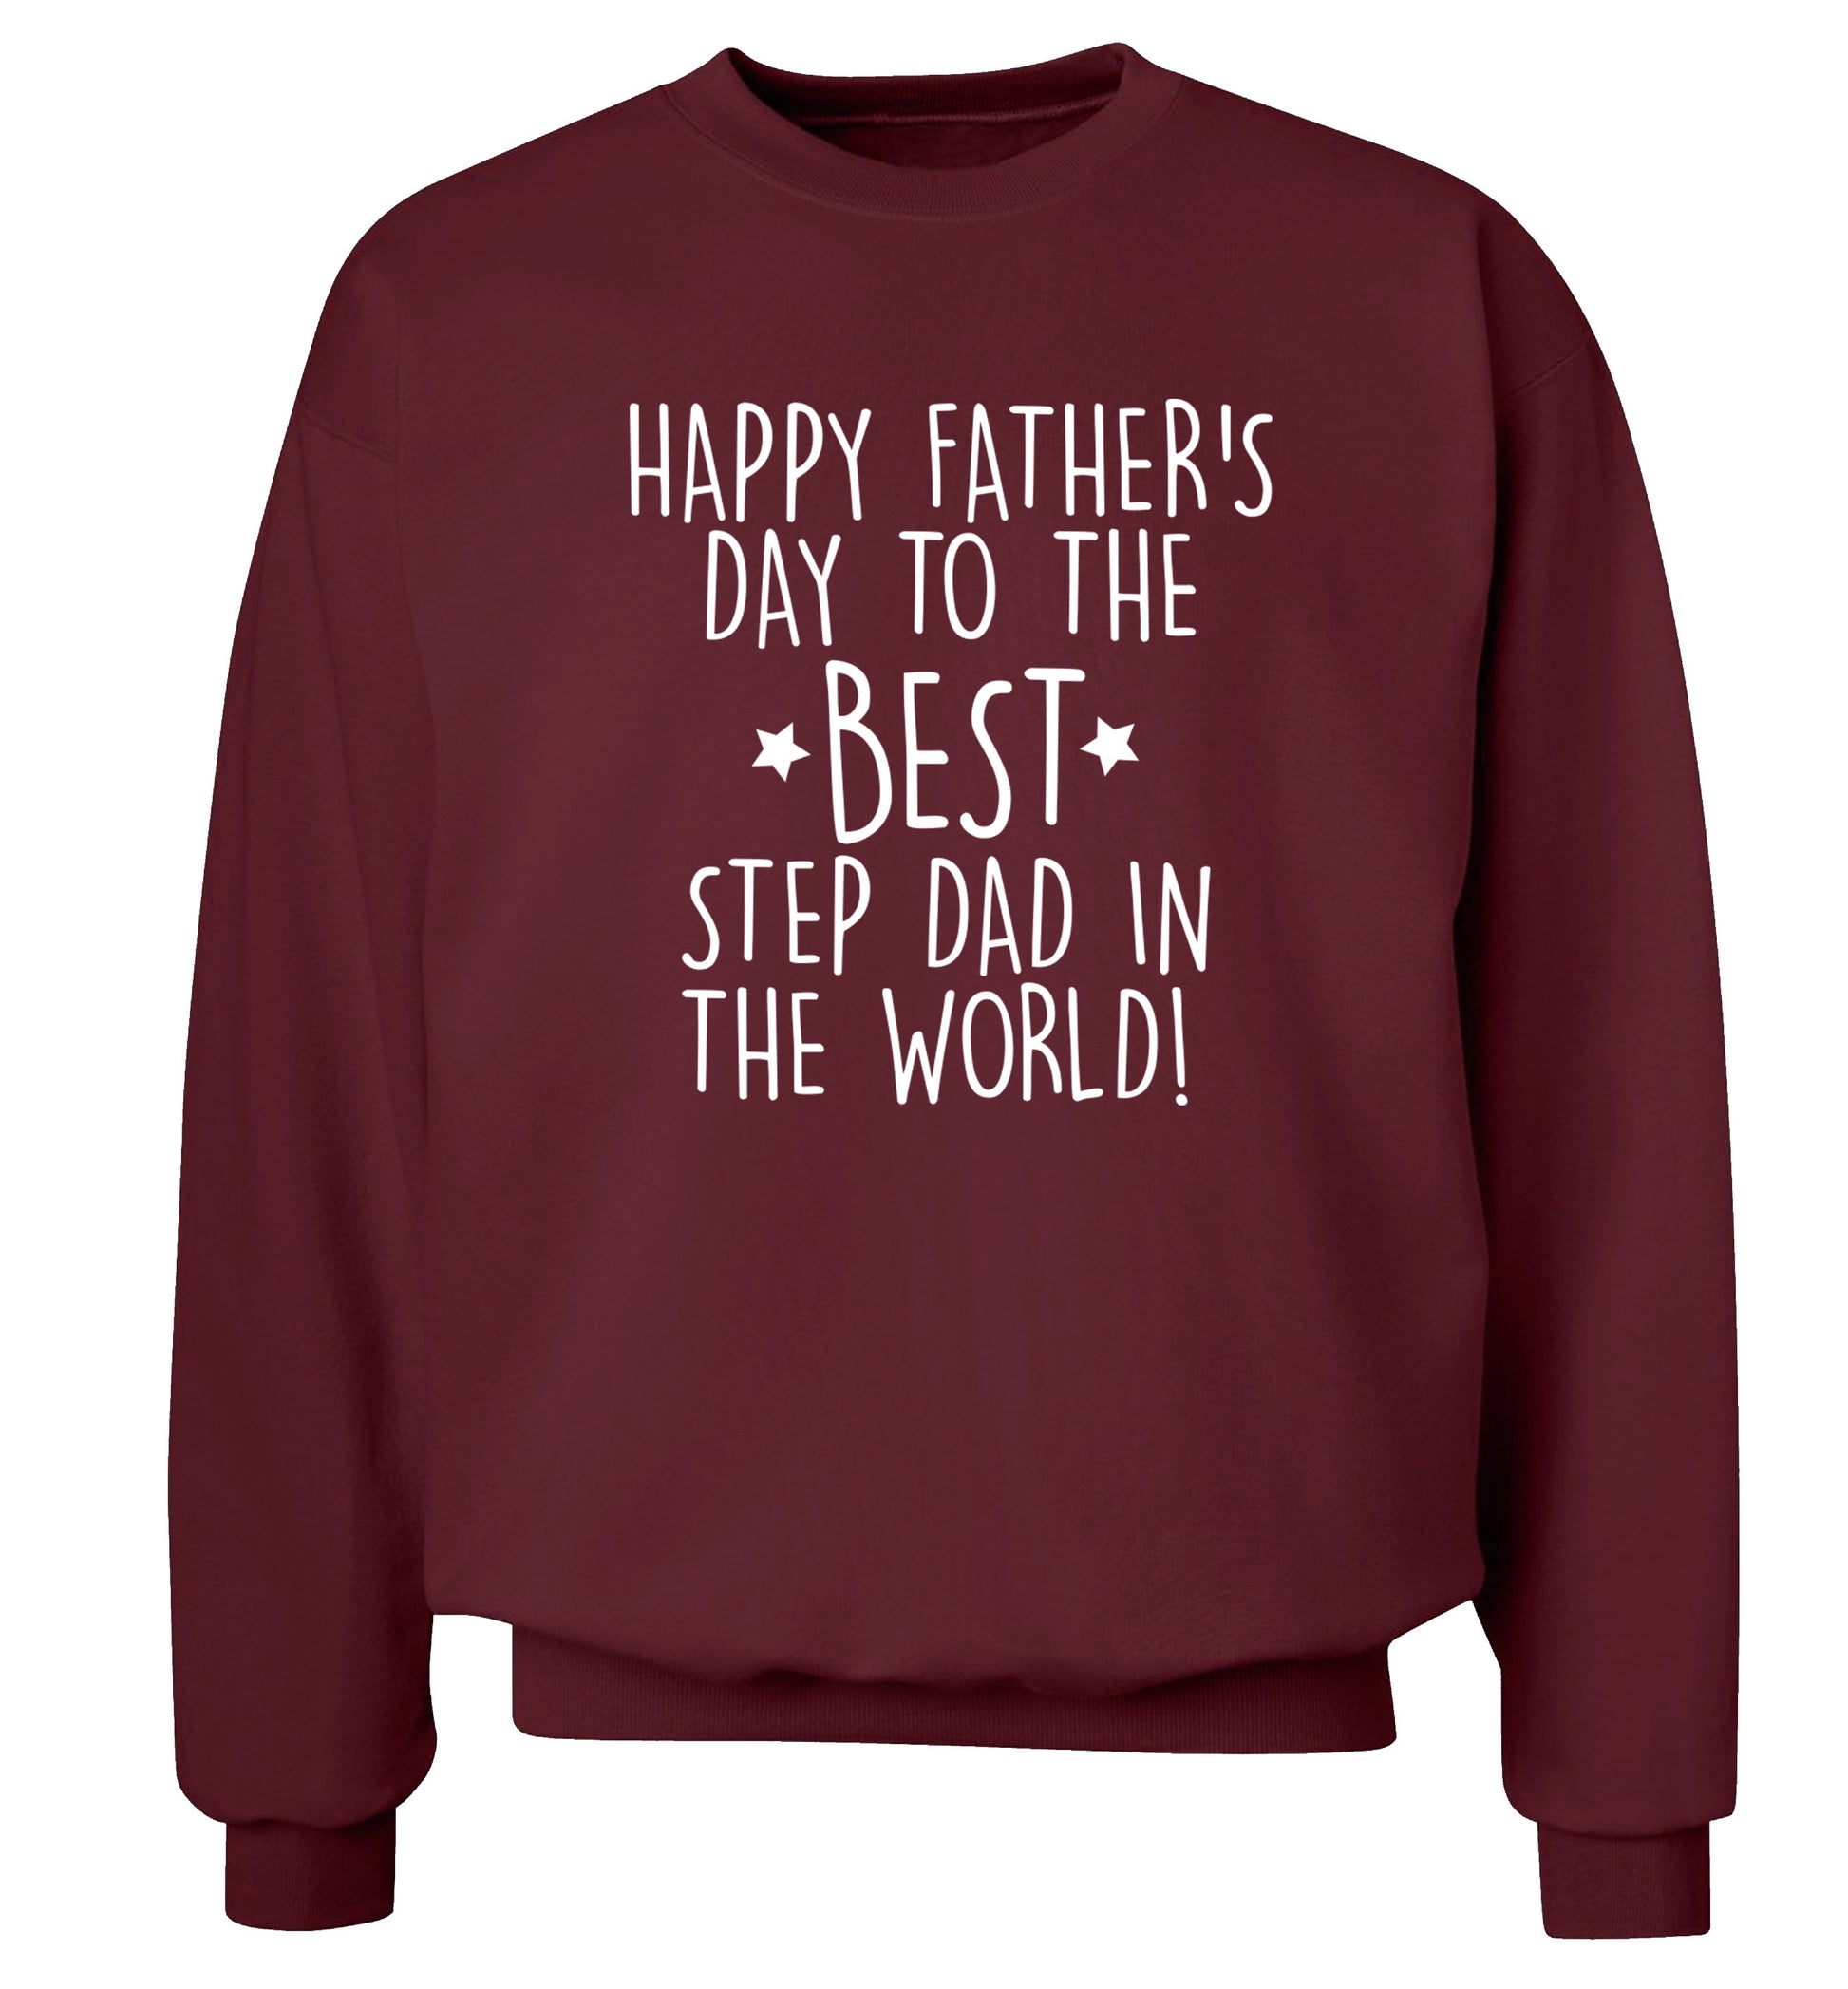 Happy Father's day to the best step dad in the world! Adult's unisex maroon Sweater 2XL